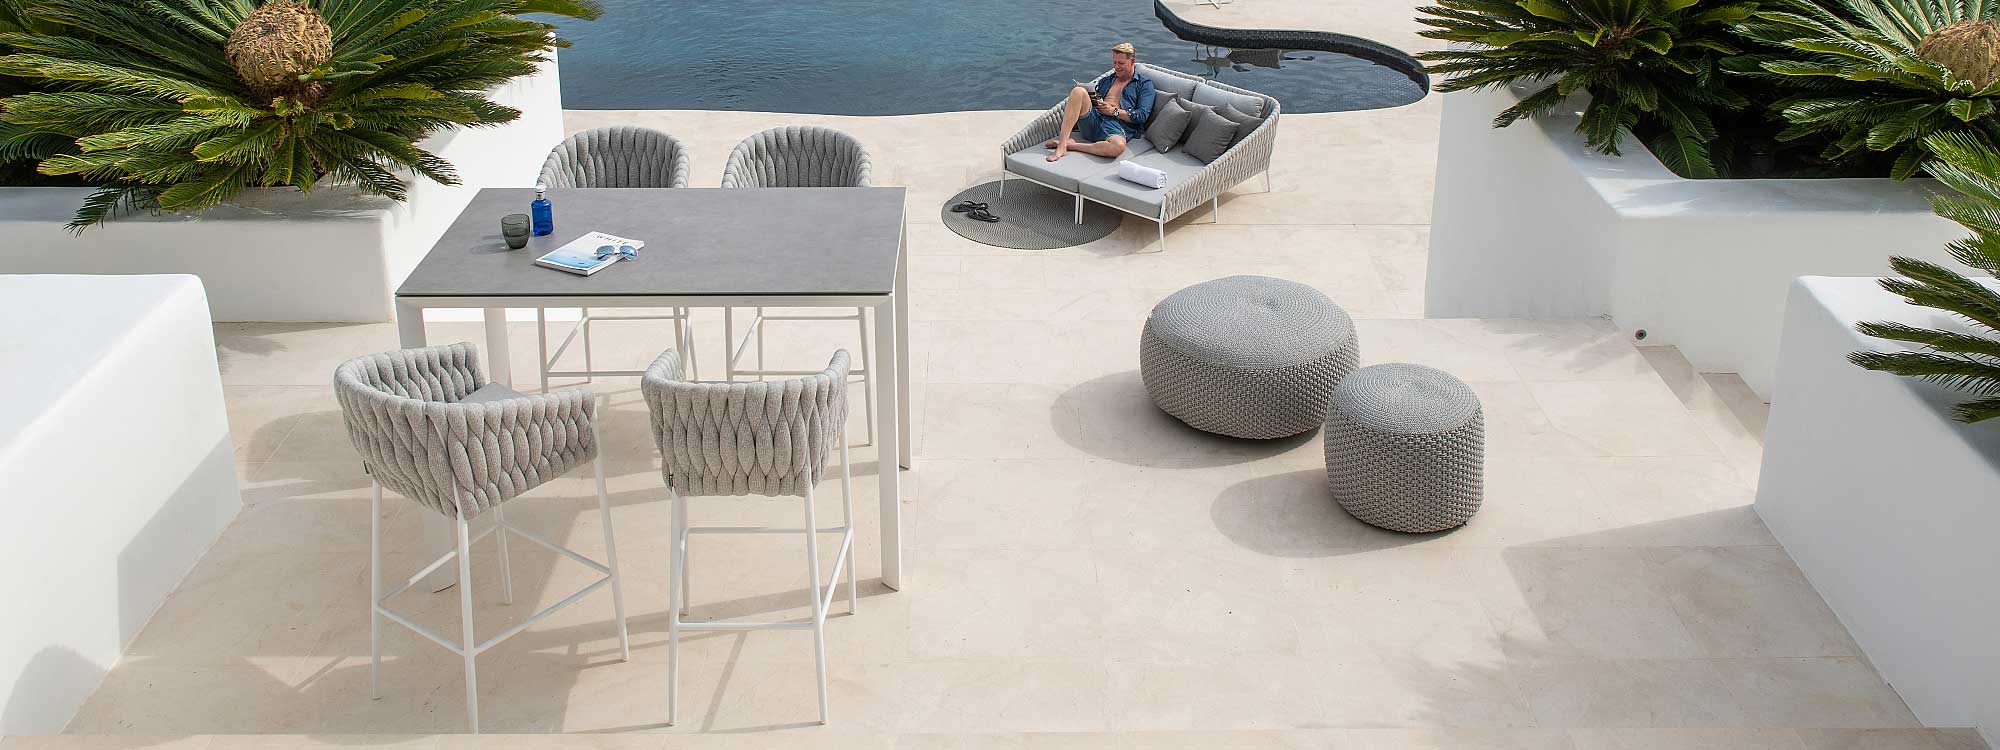 Image of Fortuna Socks outdoor bar stools and daybed on sunny poolside, surrounded by white-washed raised flower beds filled with architectural palms